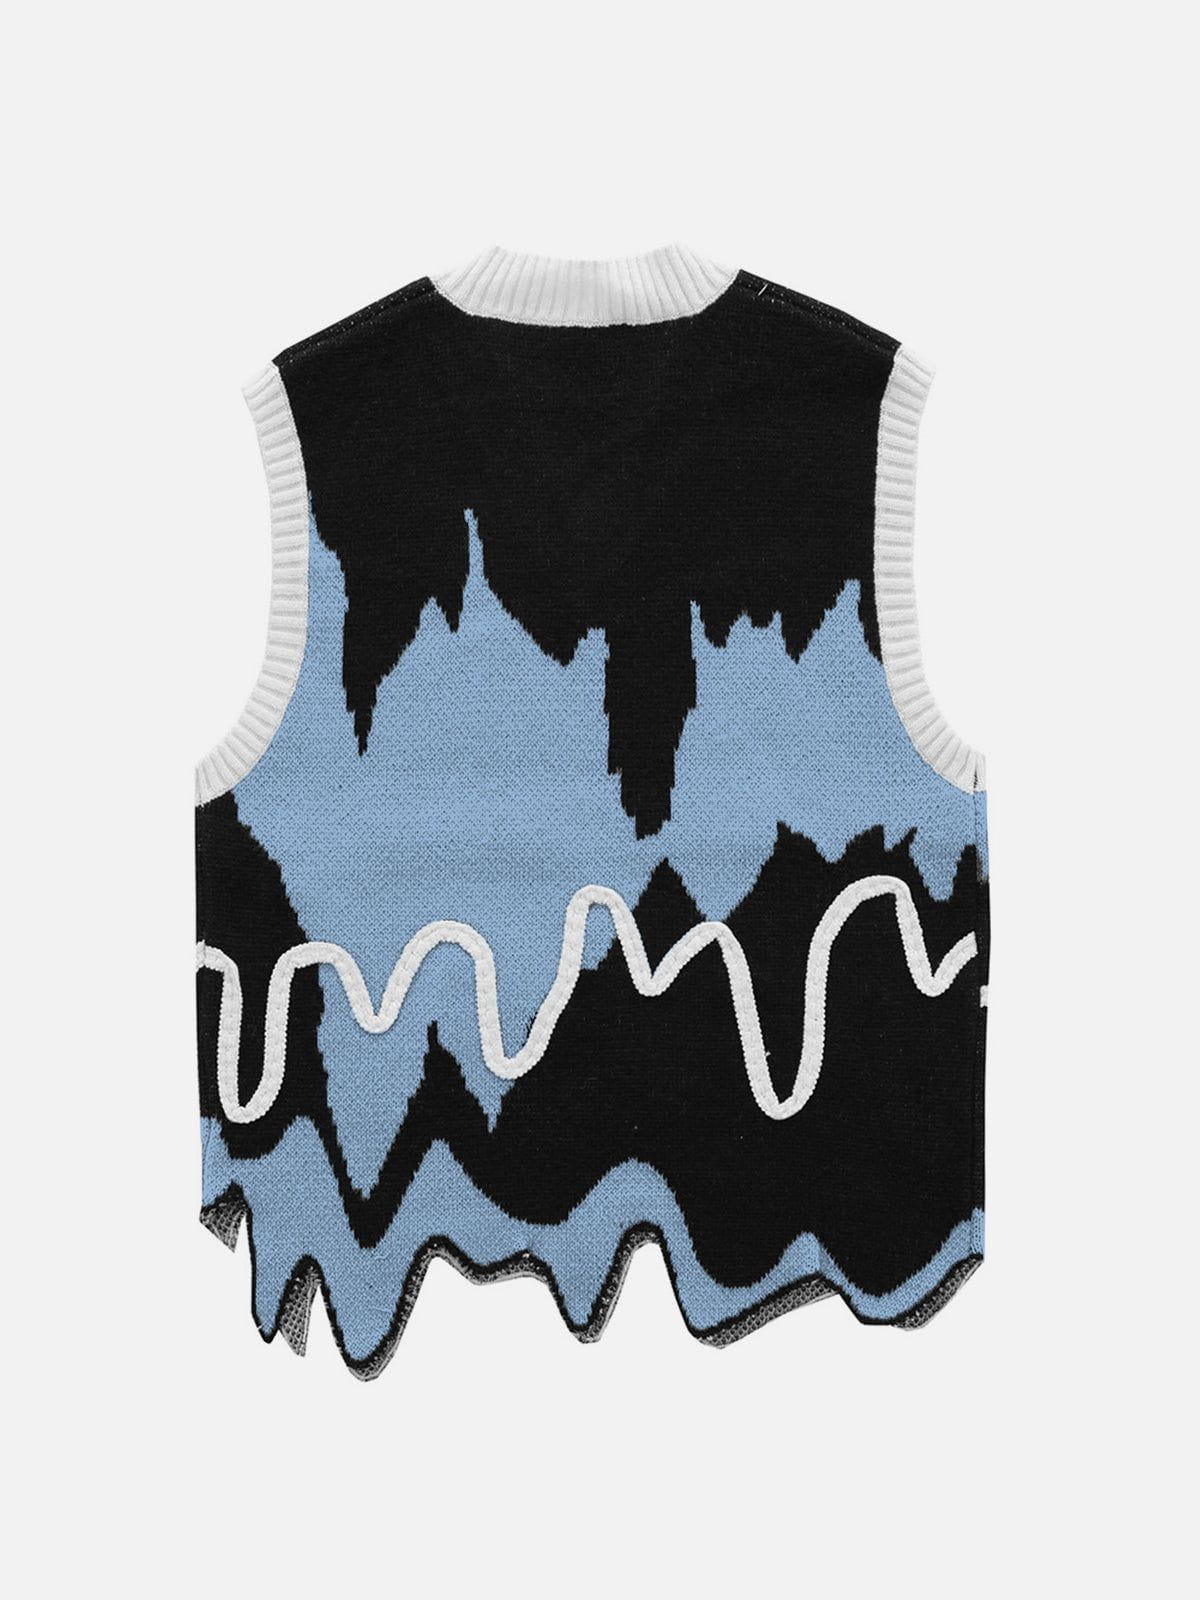 Melted "Ice Cream" Sweater Vest Streetwear Brand Techwear Combat Tactical YUGEN THEORY